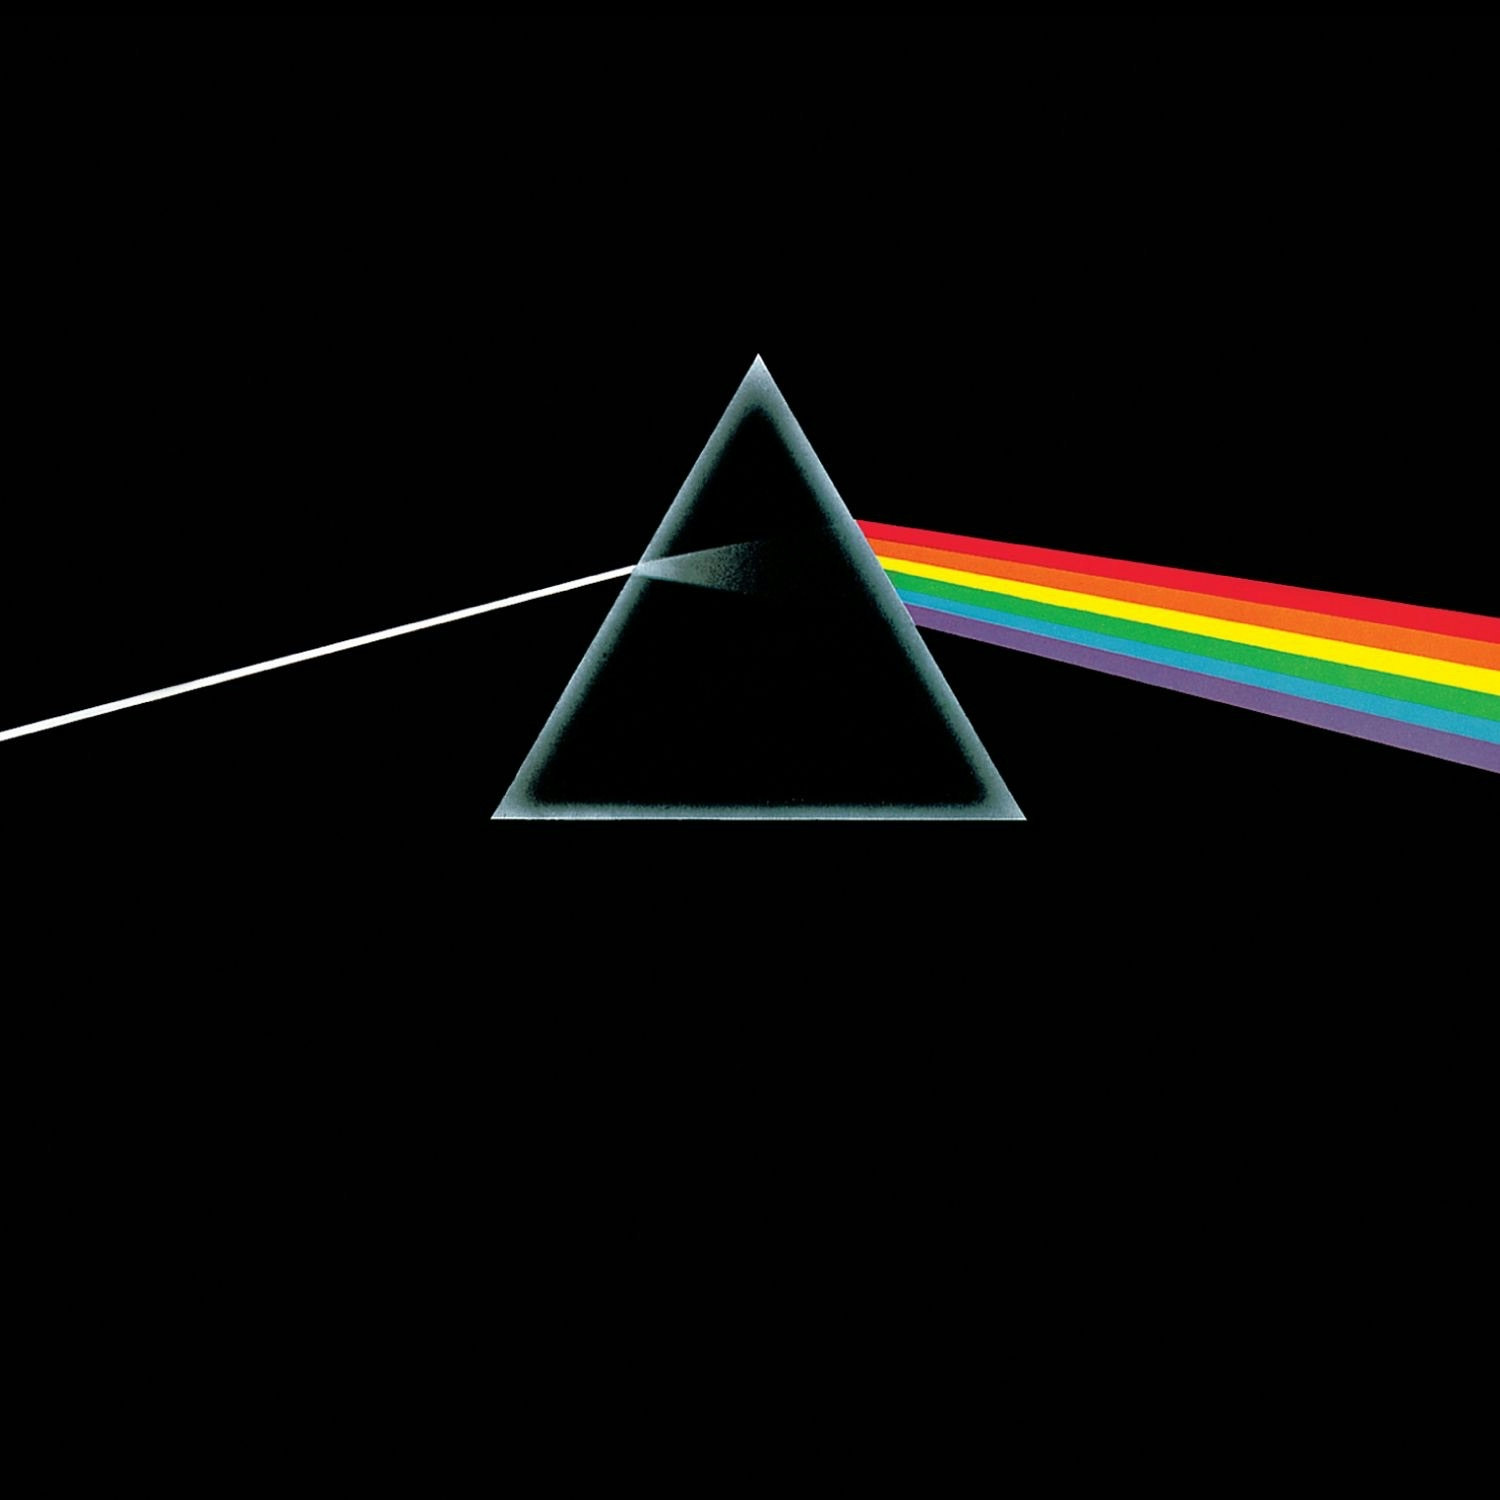 Album artwork for Album artwork for The Dark Side Of The Moon by Pink Floyd by The Dark Side Of The Moon - Pink Floyd